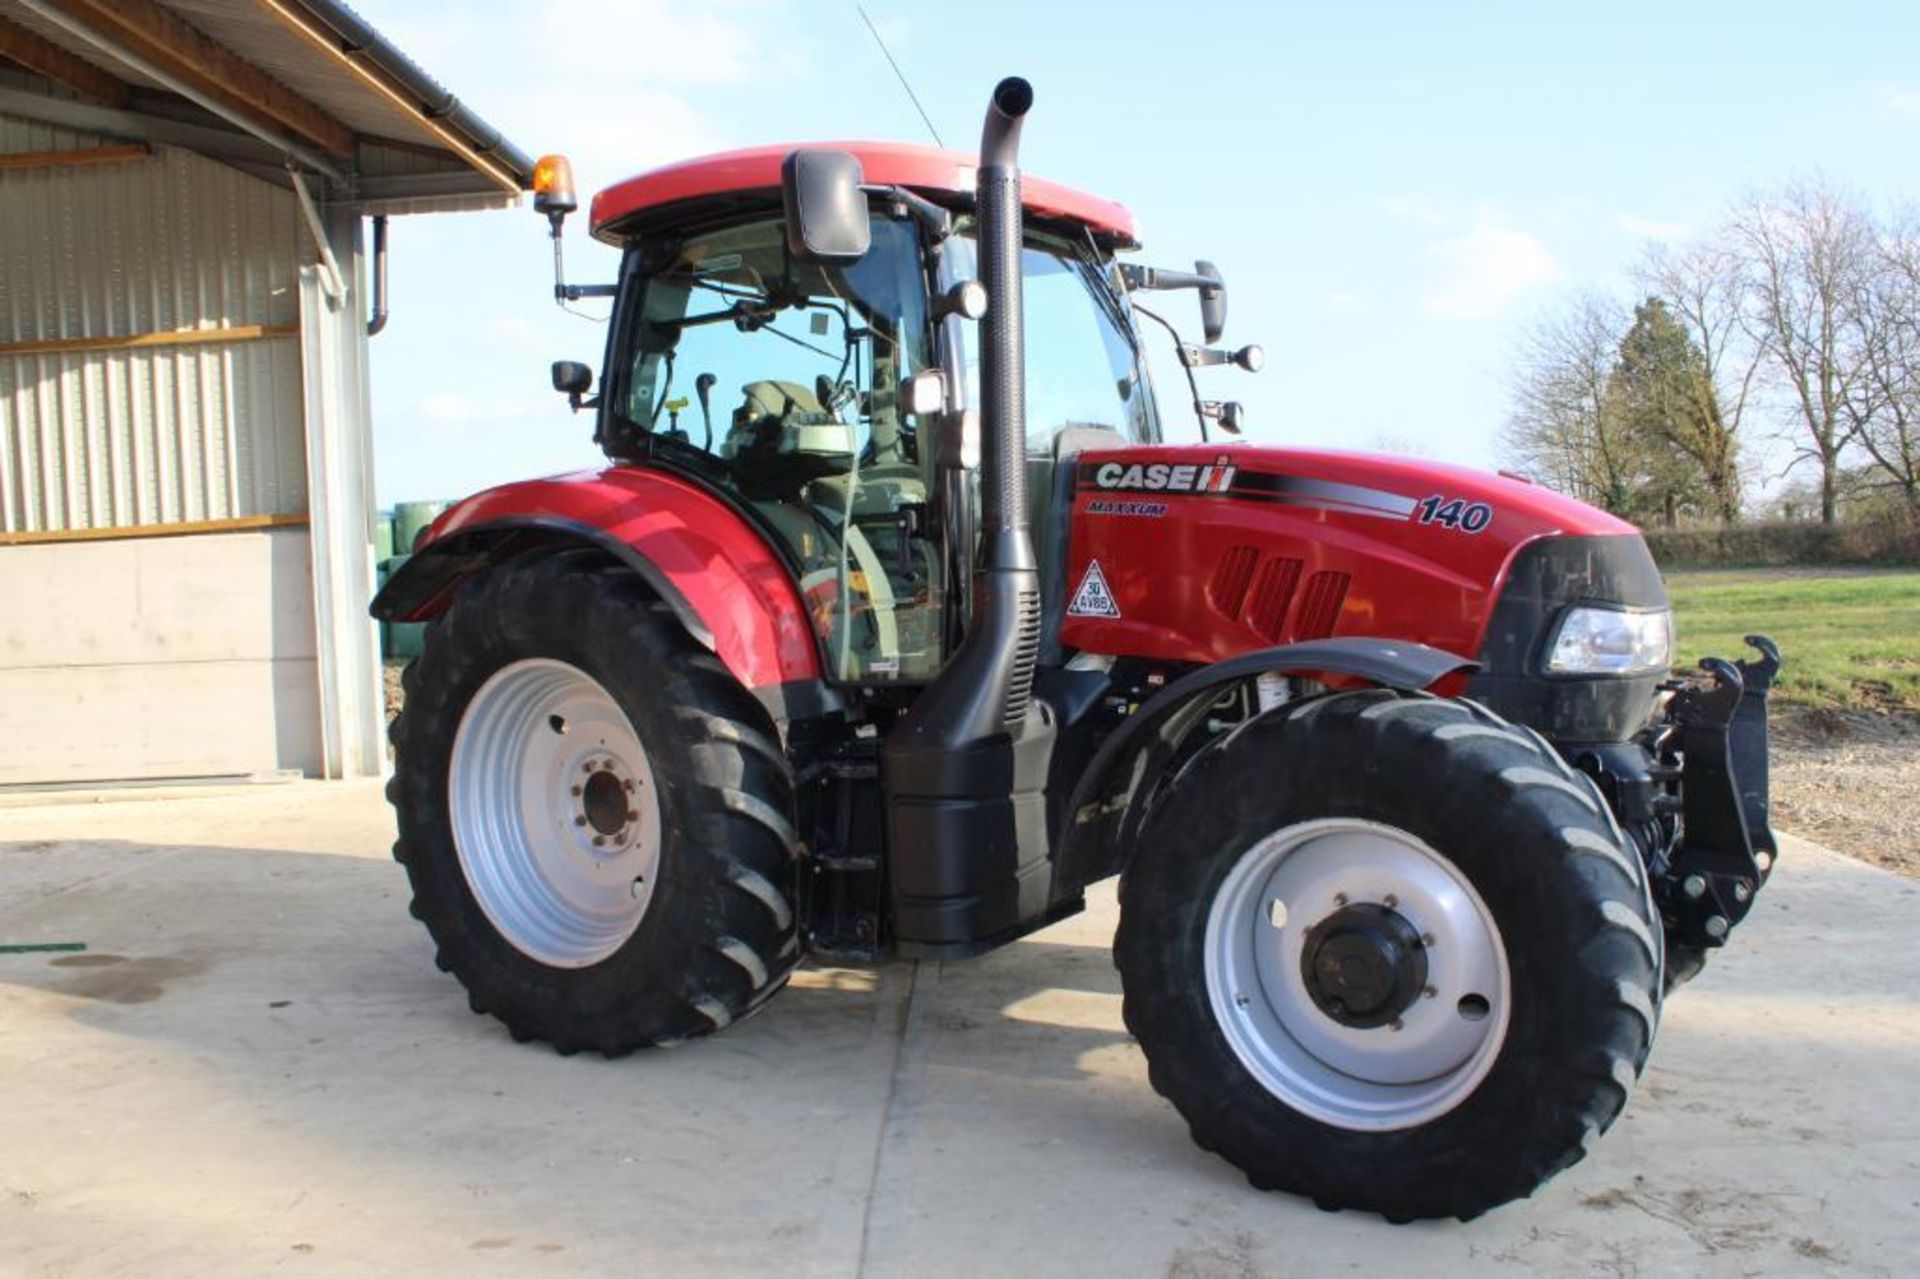 2013 Case Maxxum 140 50kph 4wd Powershift tractor with multicontroller joystick, front linkage, cab - Image 21 of 40